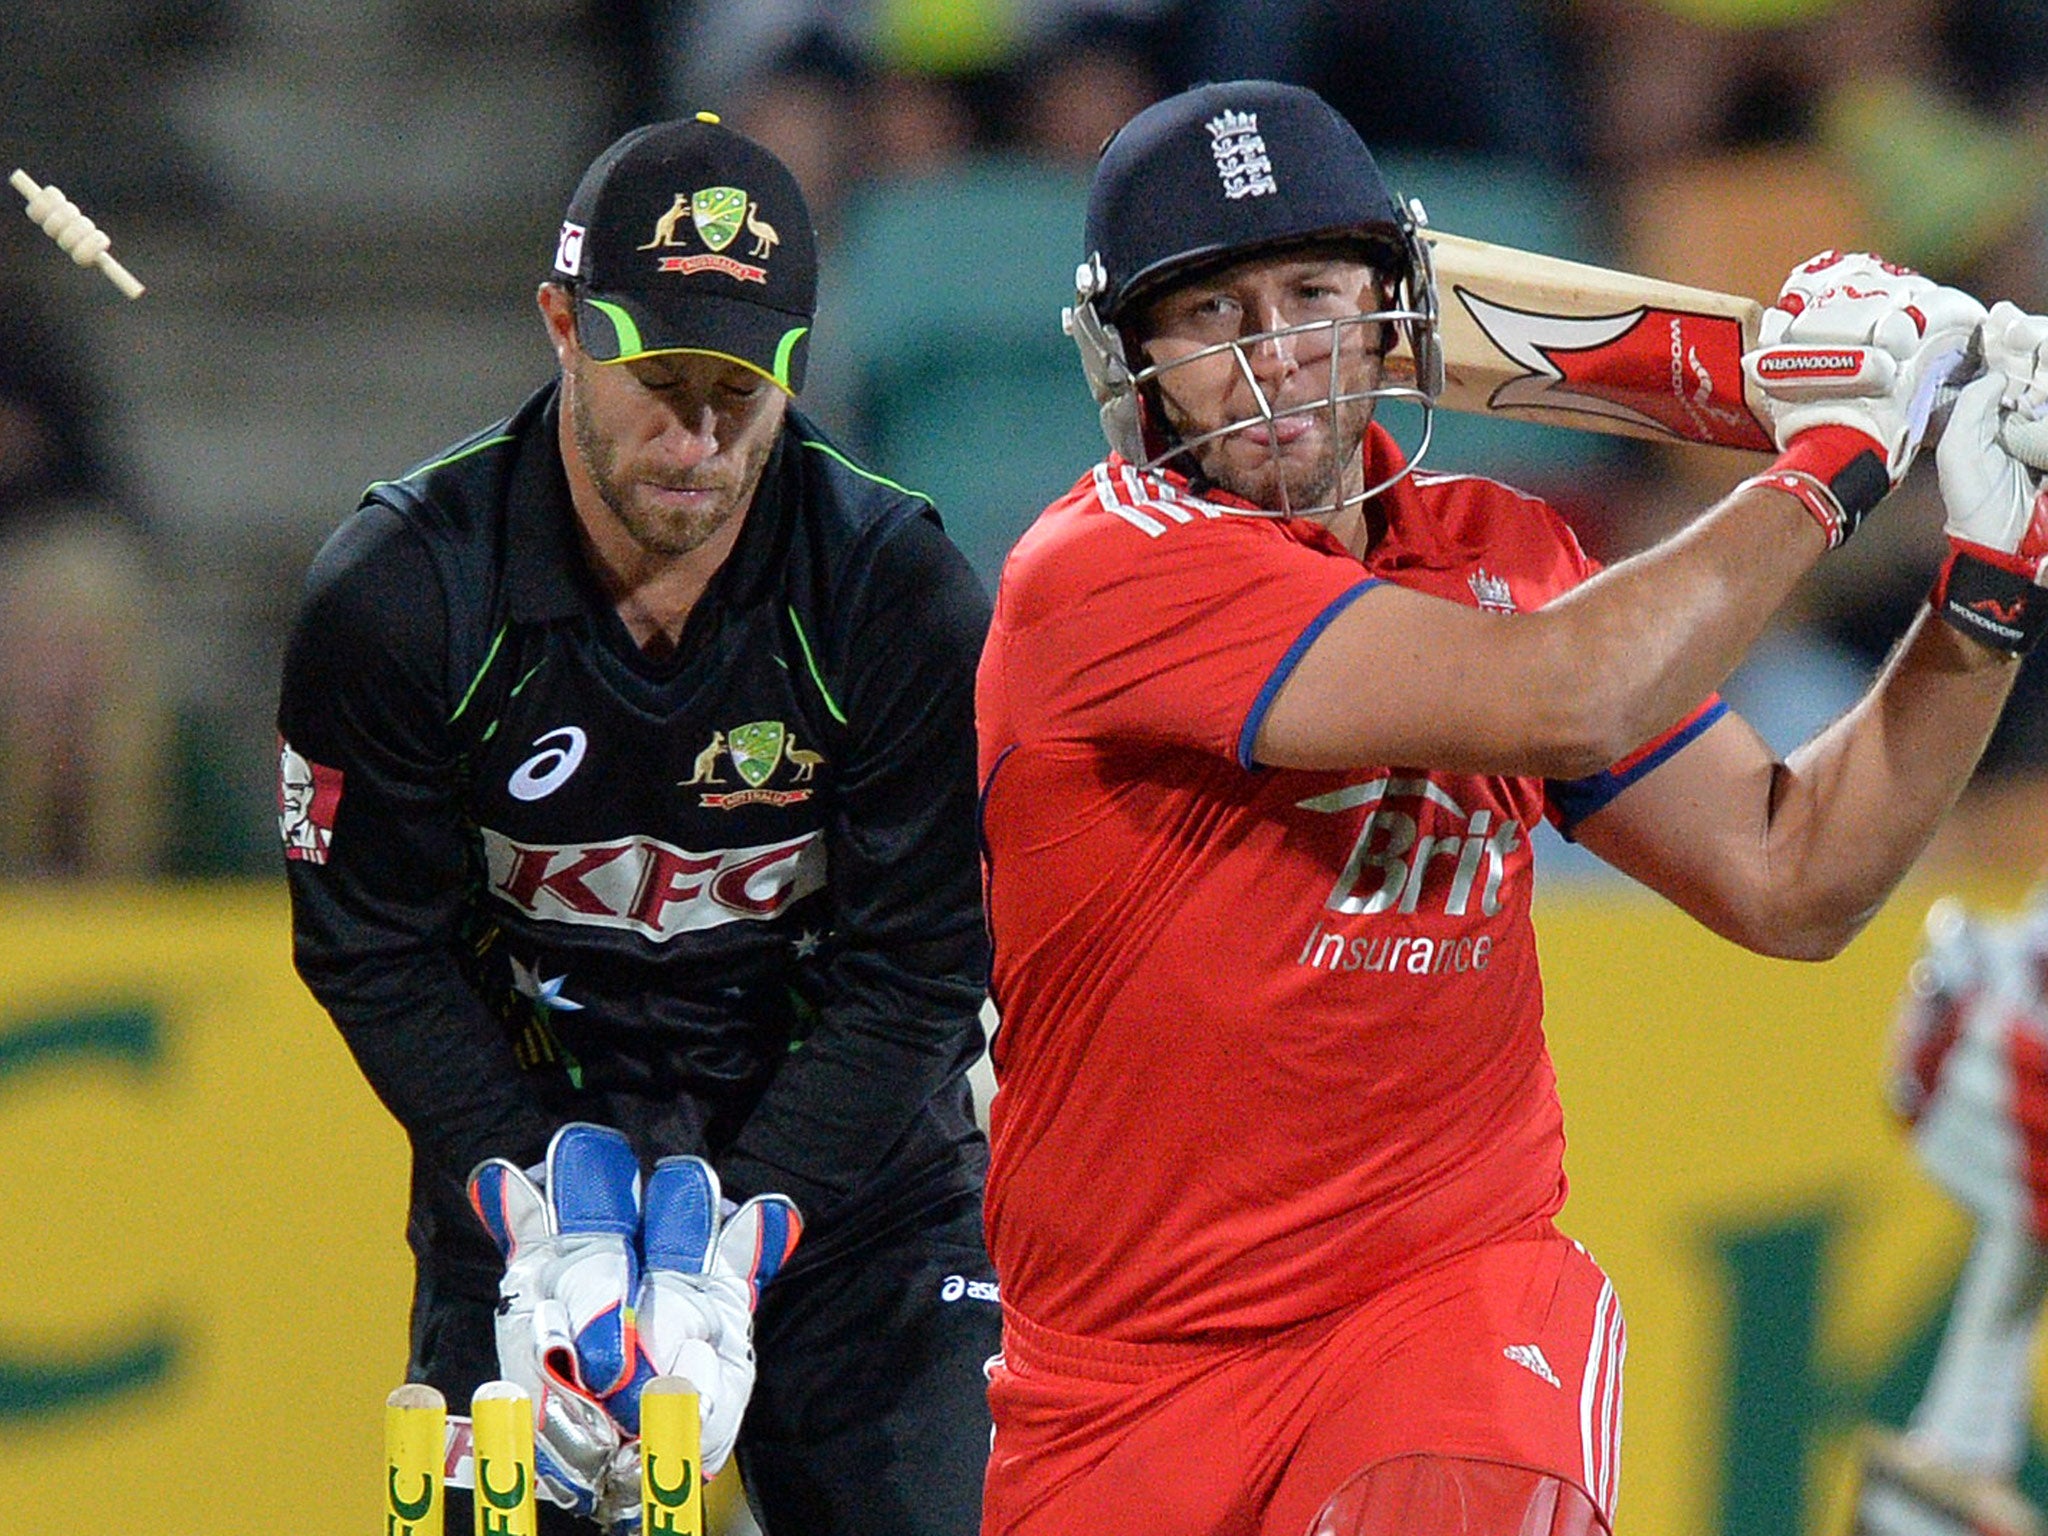 England's batsman Tim Bresnan (R) is clean bowled by Australia's James Muirhead during the first Twenty20 match of the series in Hobart